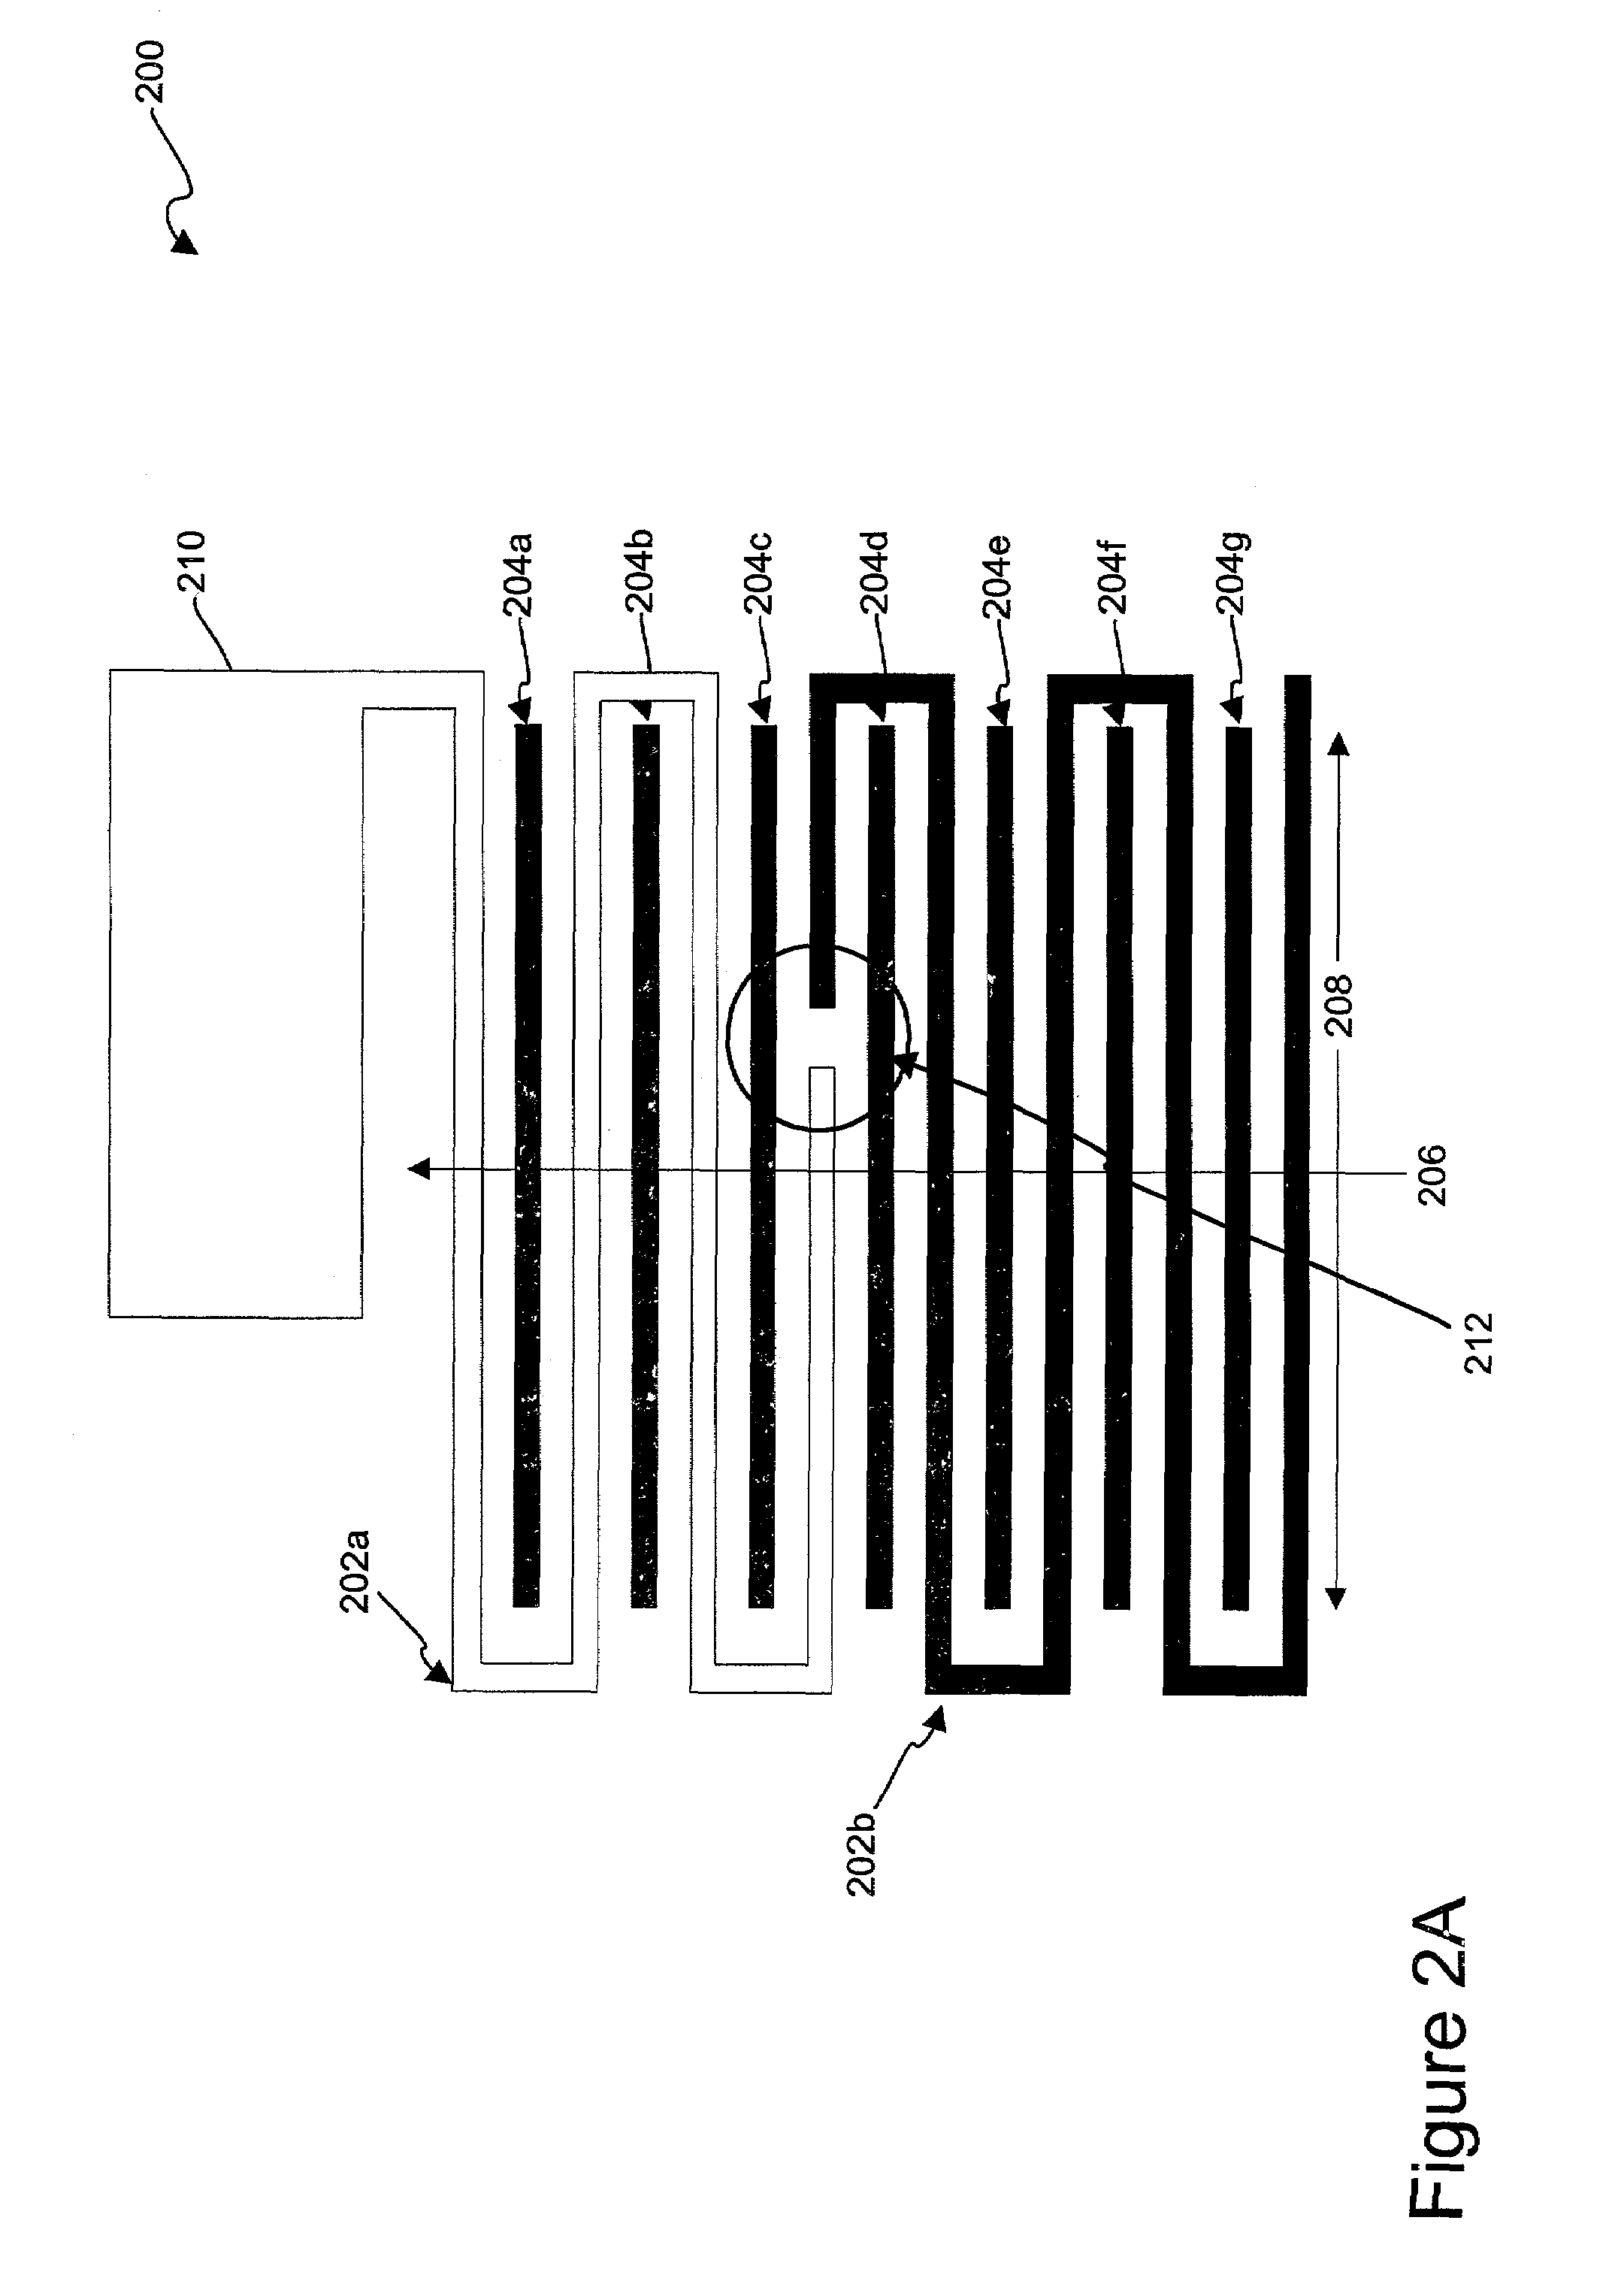 Apparatus and methods for semiconductor IC failure detection